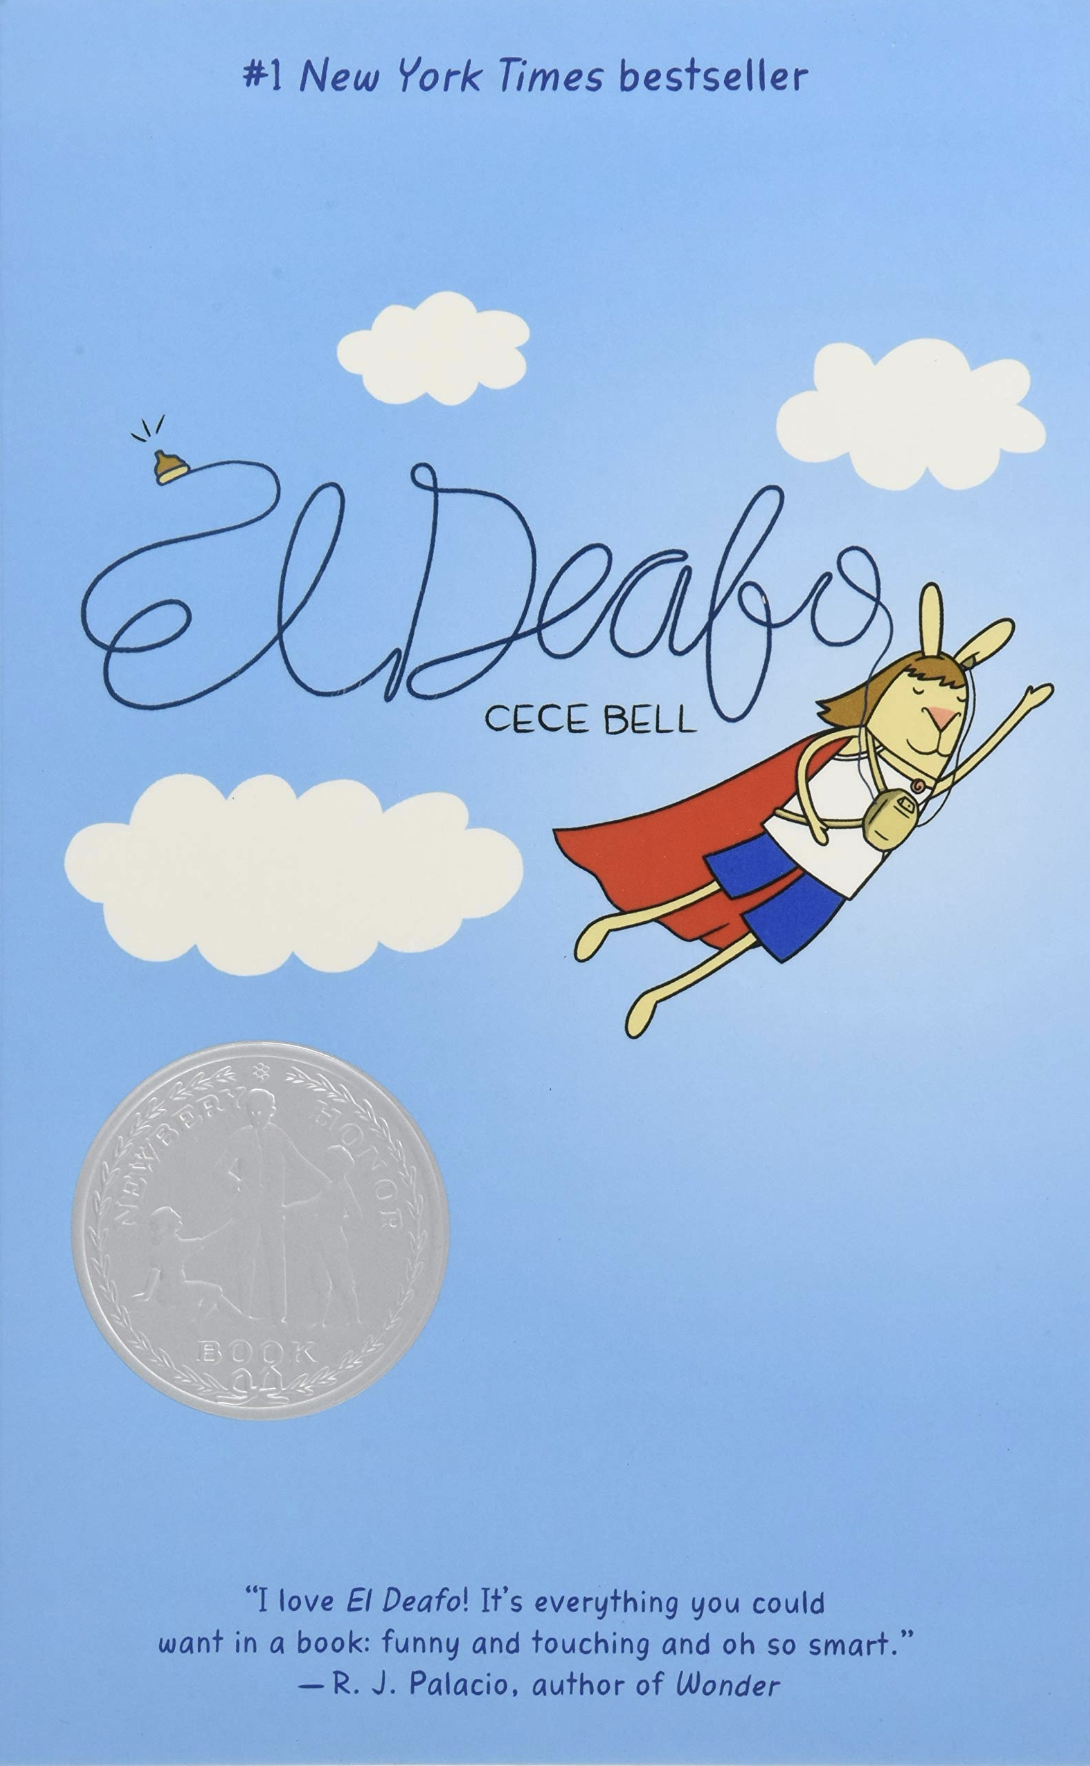 Blue book cover of El Deafo by Cece Bell